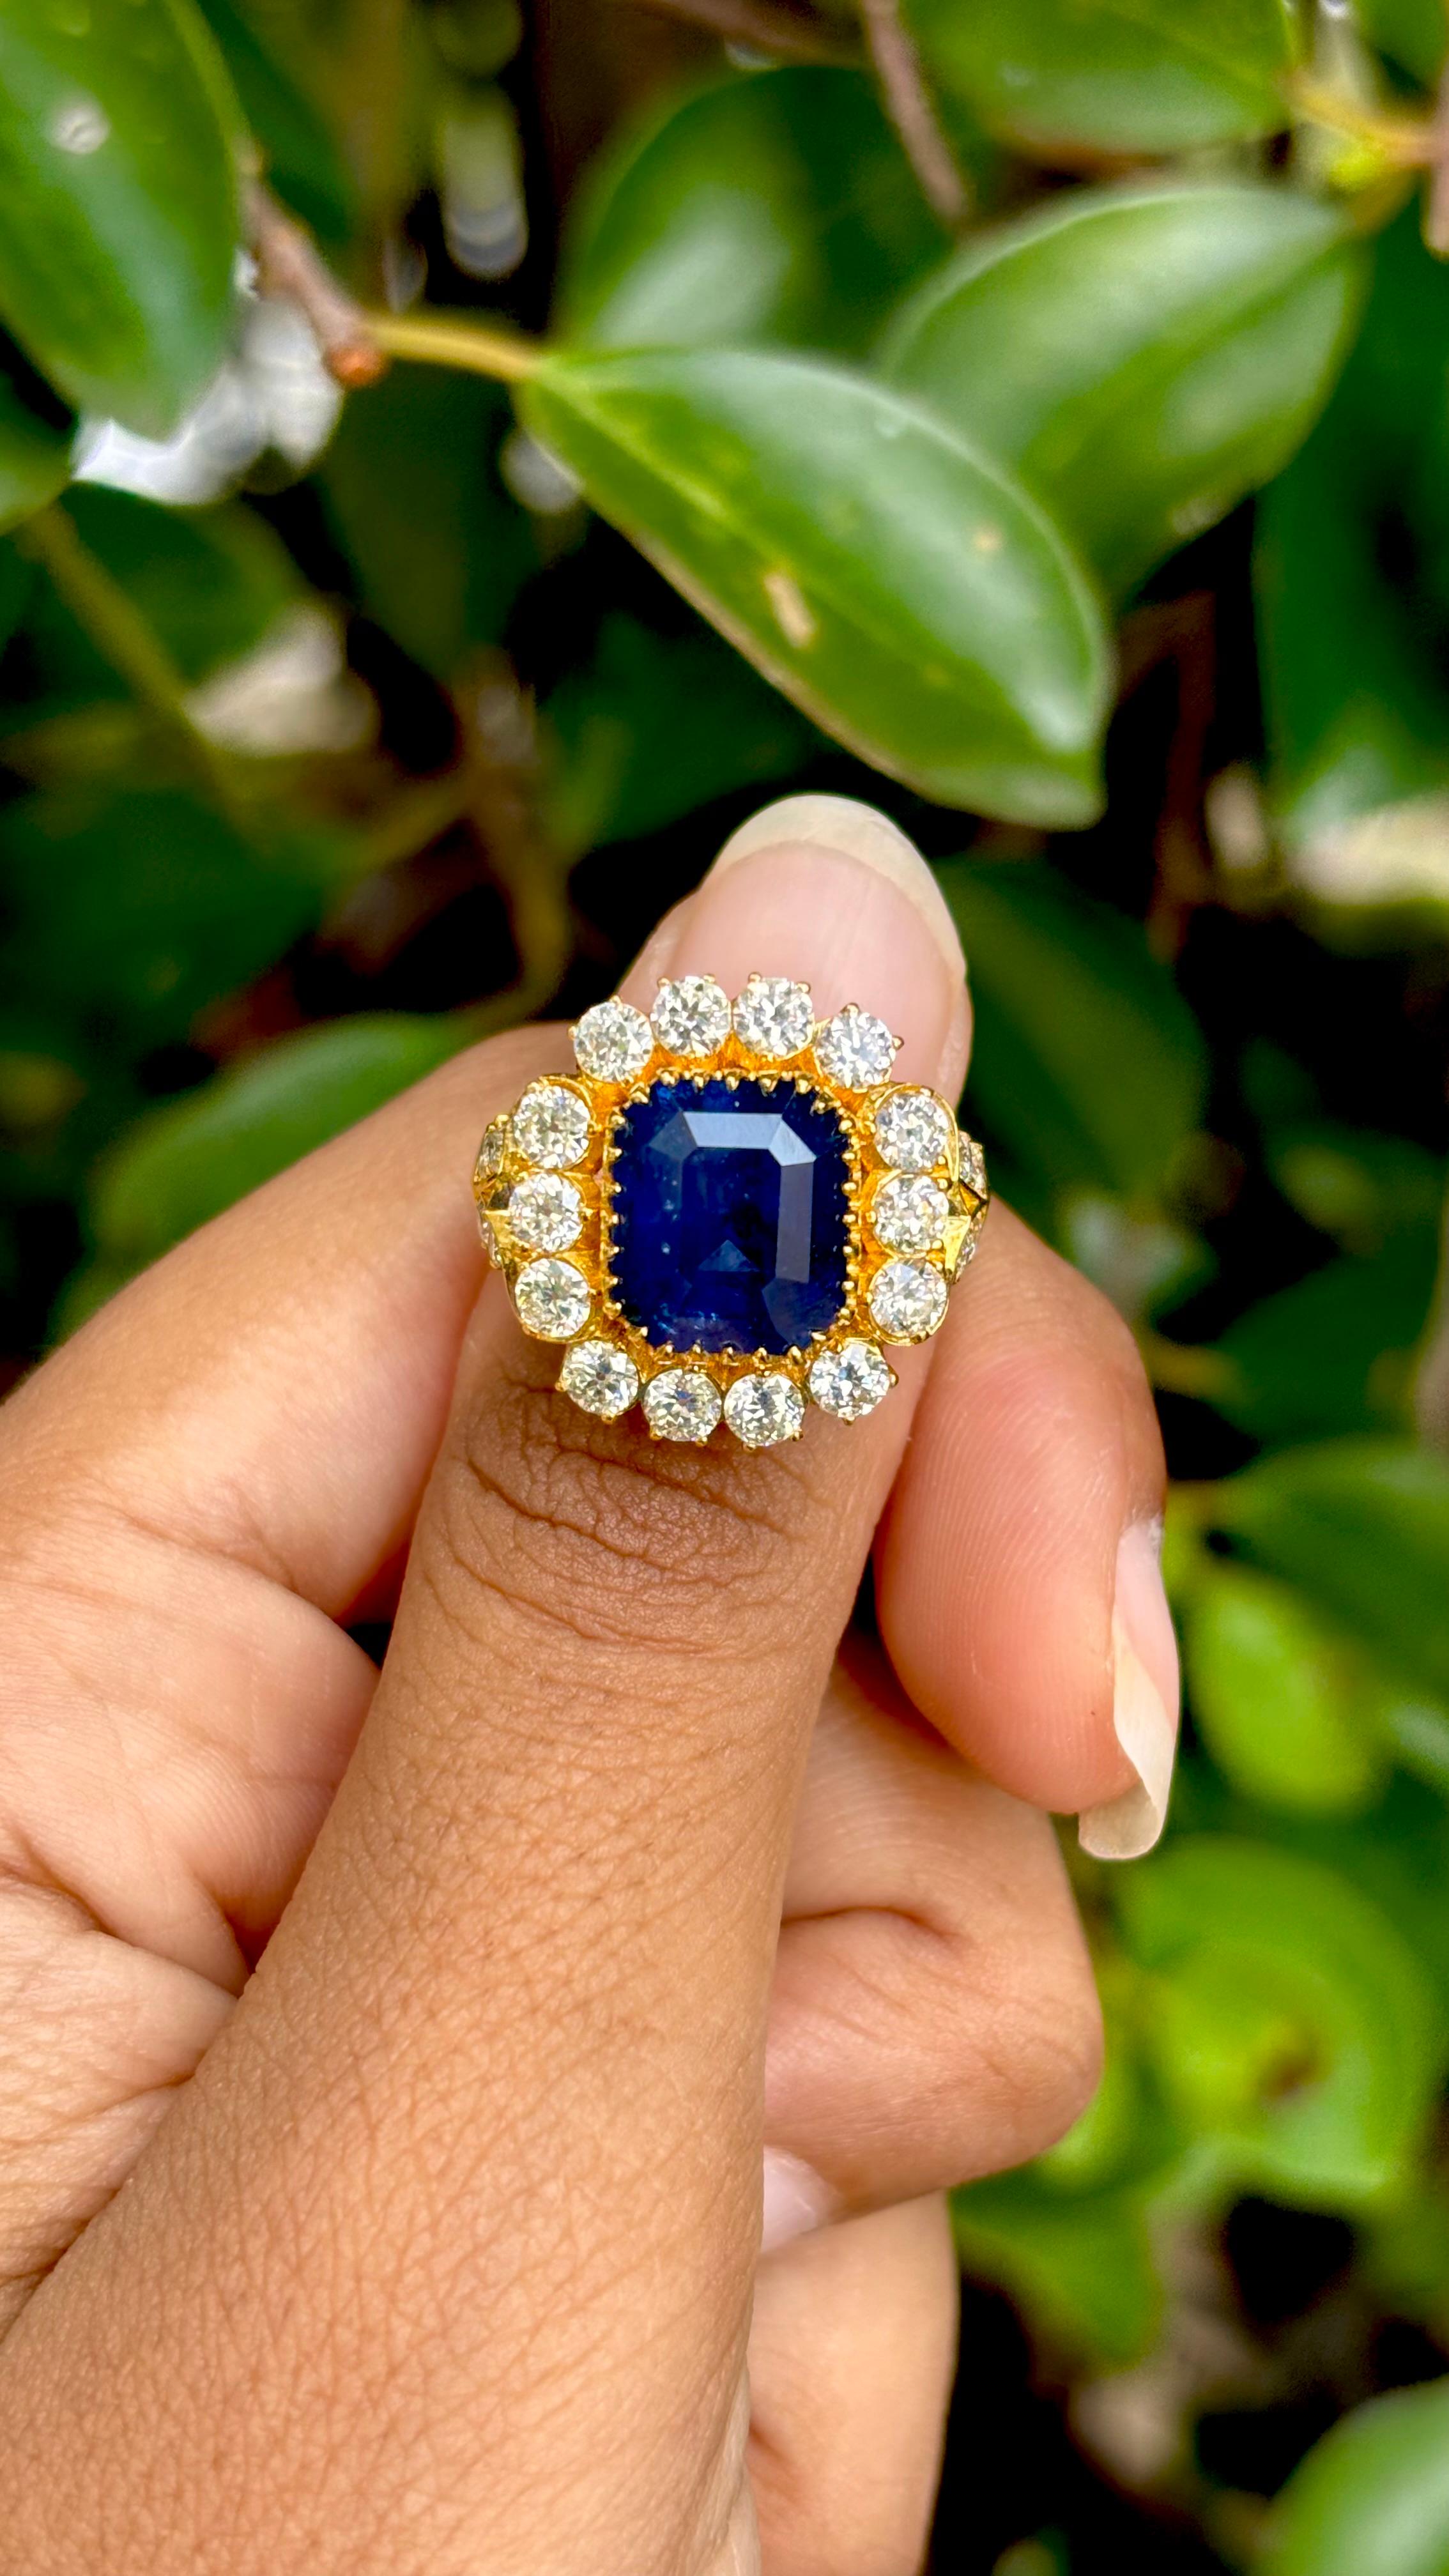 Presenting this extraordinary Sapphire Ring that represents the jewellery from a bygone era that is bound to leave you in awe. This remarkable piece of jewelry features an exceptional 5.28 Carat Sapphire, making it a true rarity that is not easily